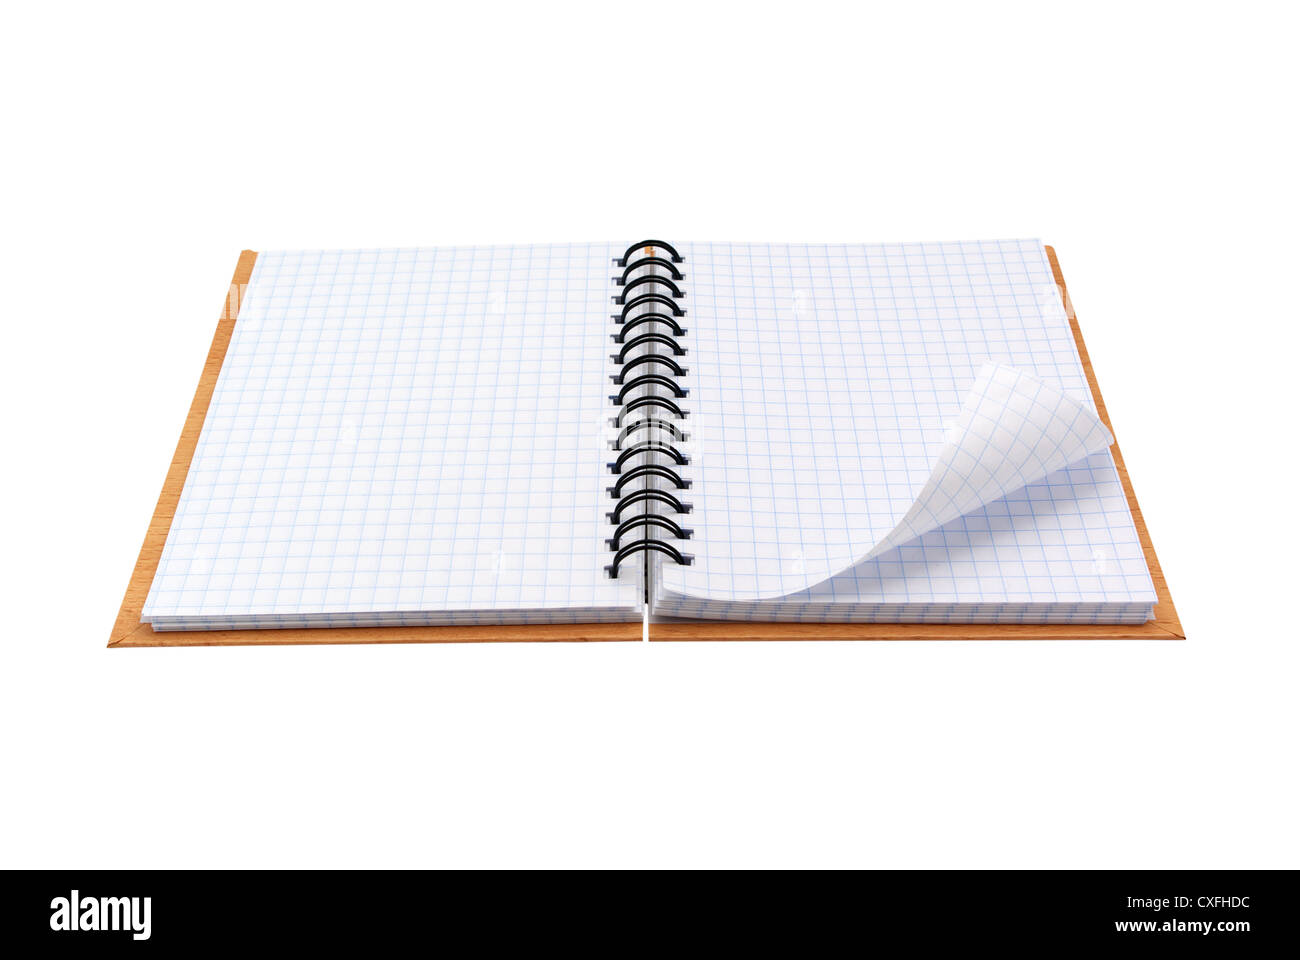 Open note pad. Isolated object. Stock Photo